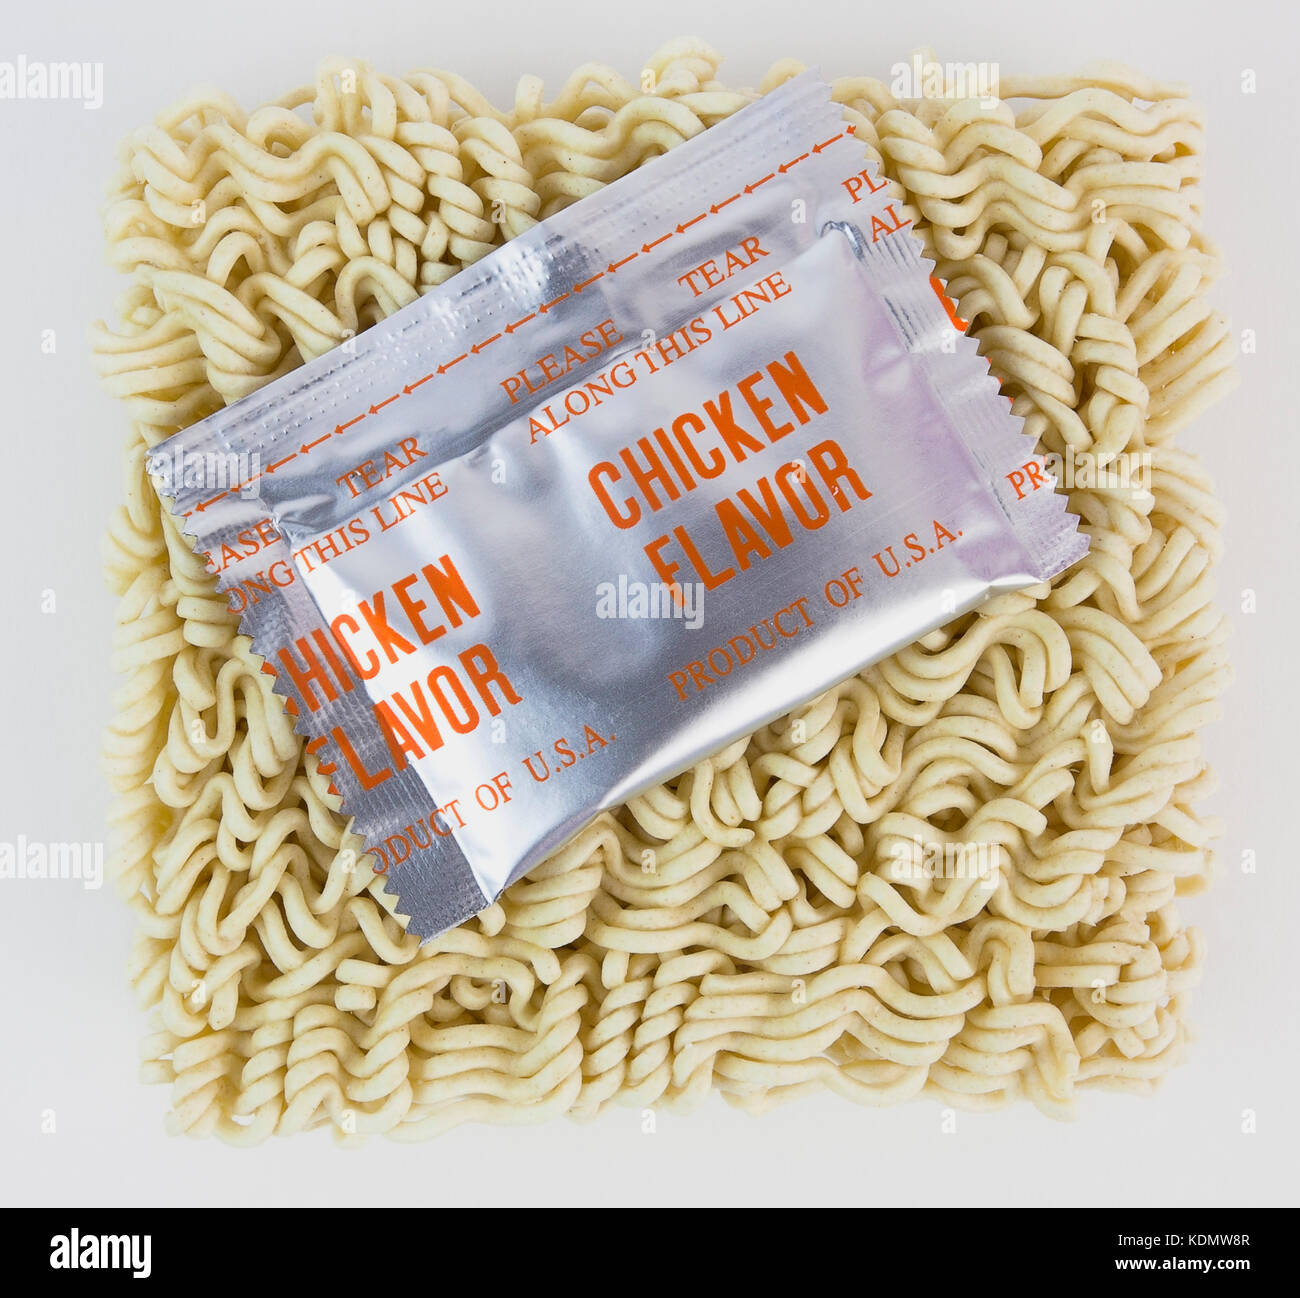 Uncooked ramen noodle meal with chicken flavor packet. Stock Photo